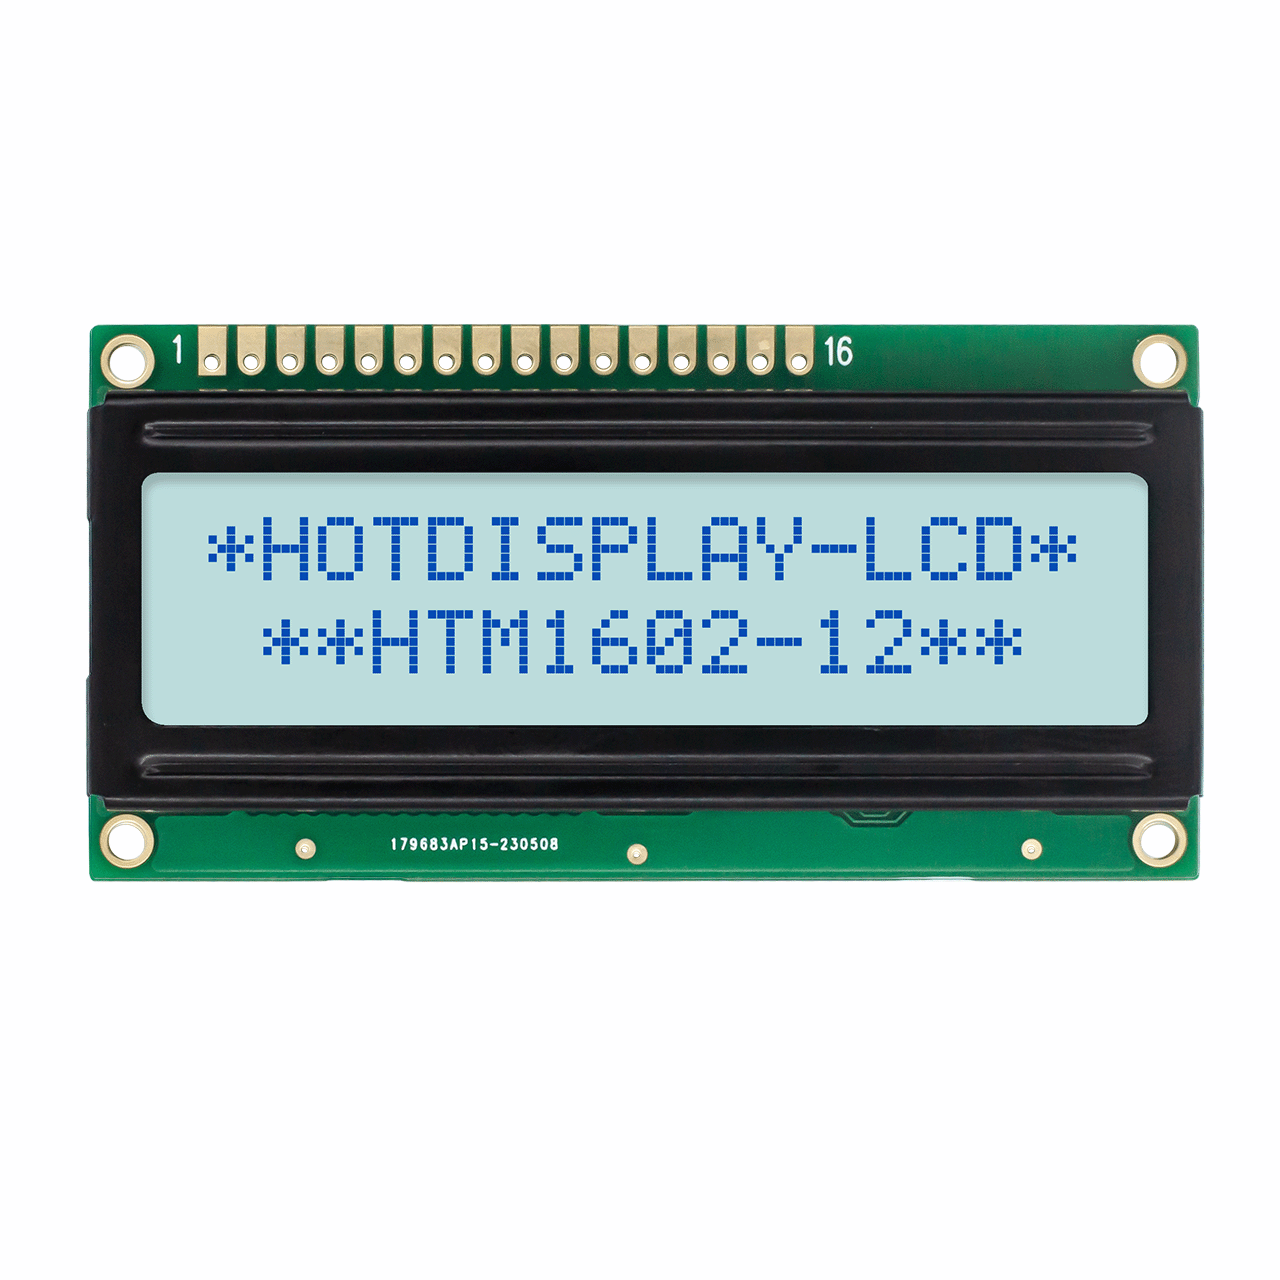 5.0V 2x16 Character MONO LCD Display | STN+ Gray  with Side White Backlight -Arduino